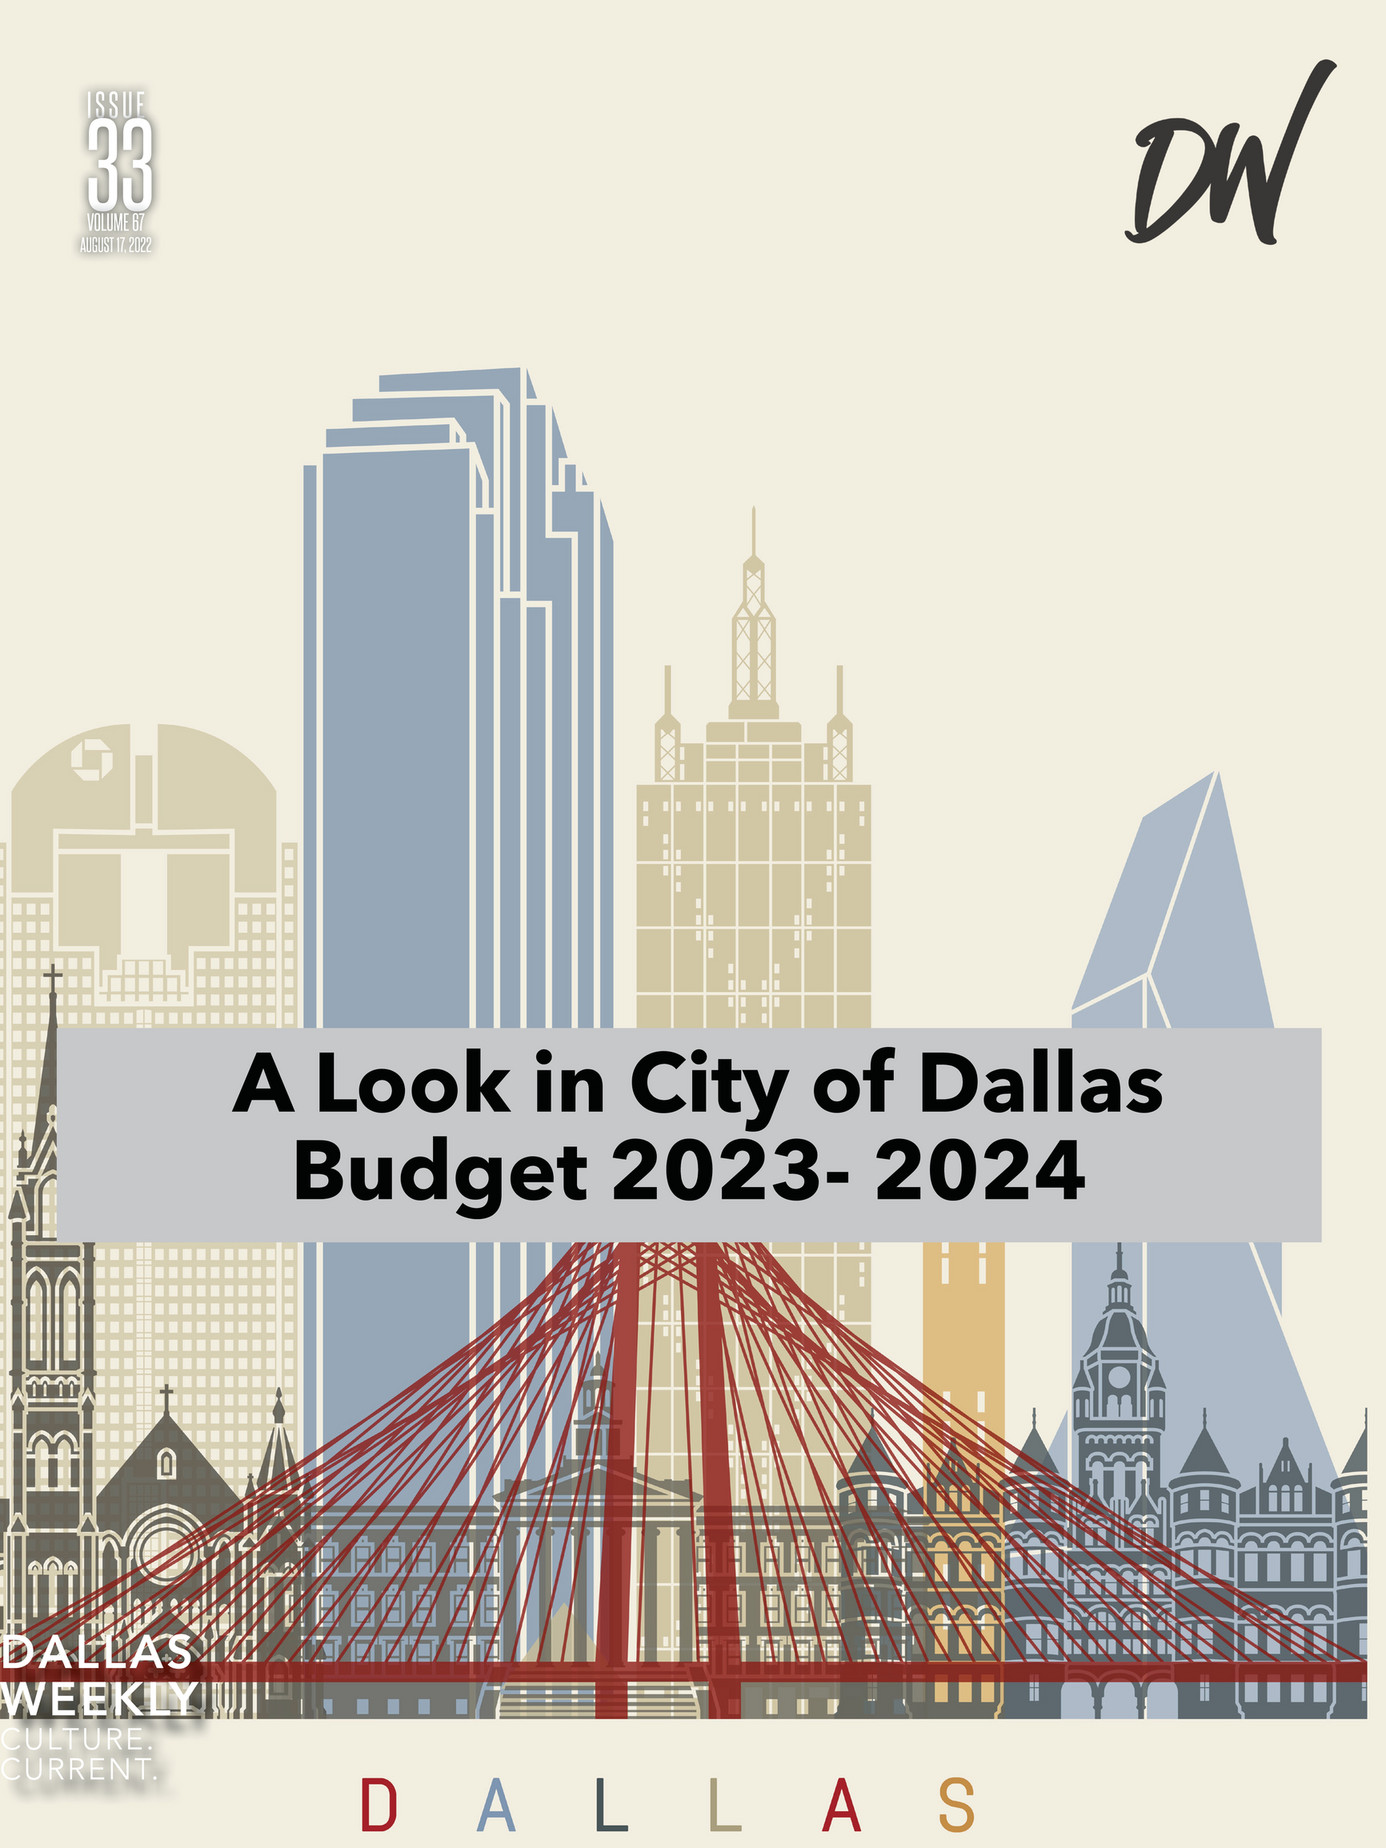 Dallas Weekly August 17, 2022 l A Look in City of Dallas Budget 2023